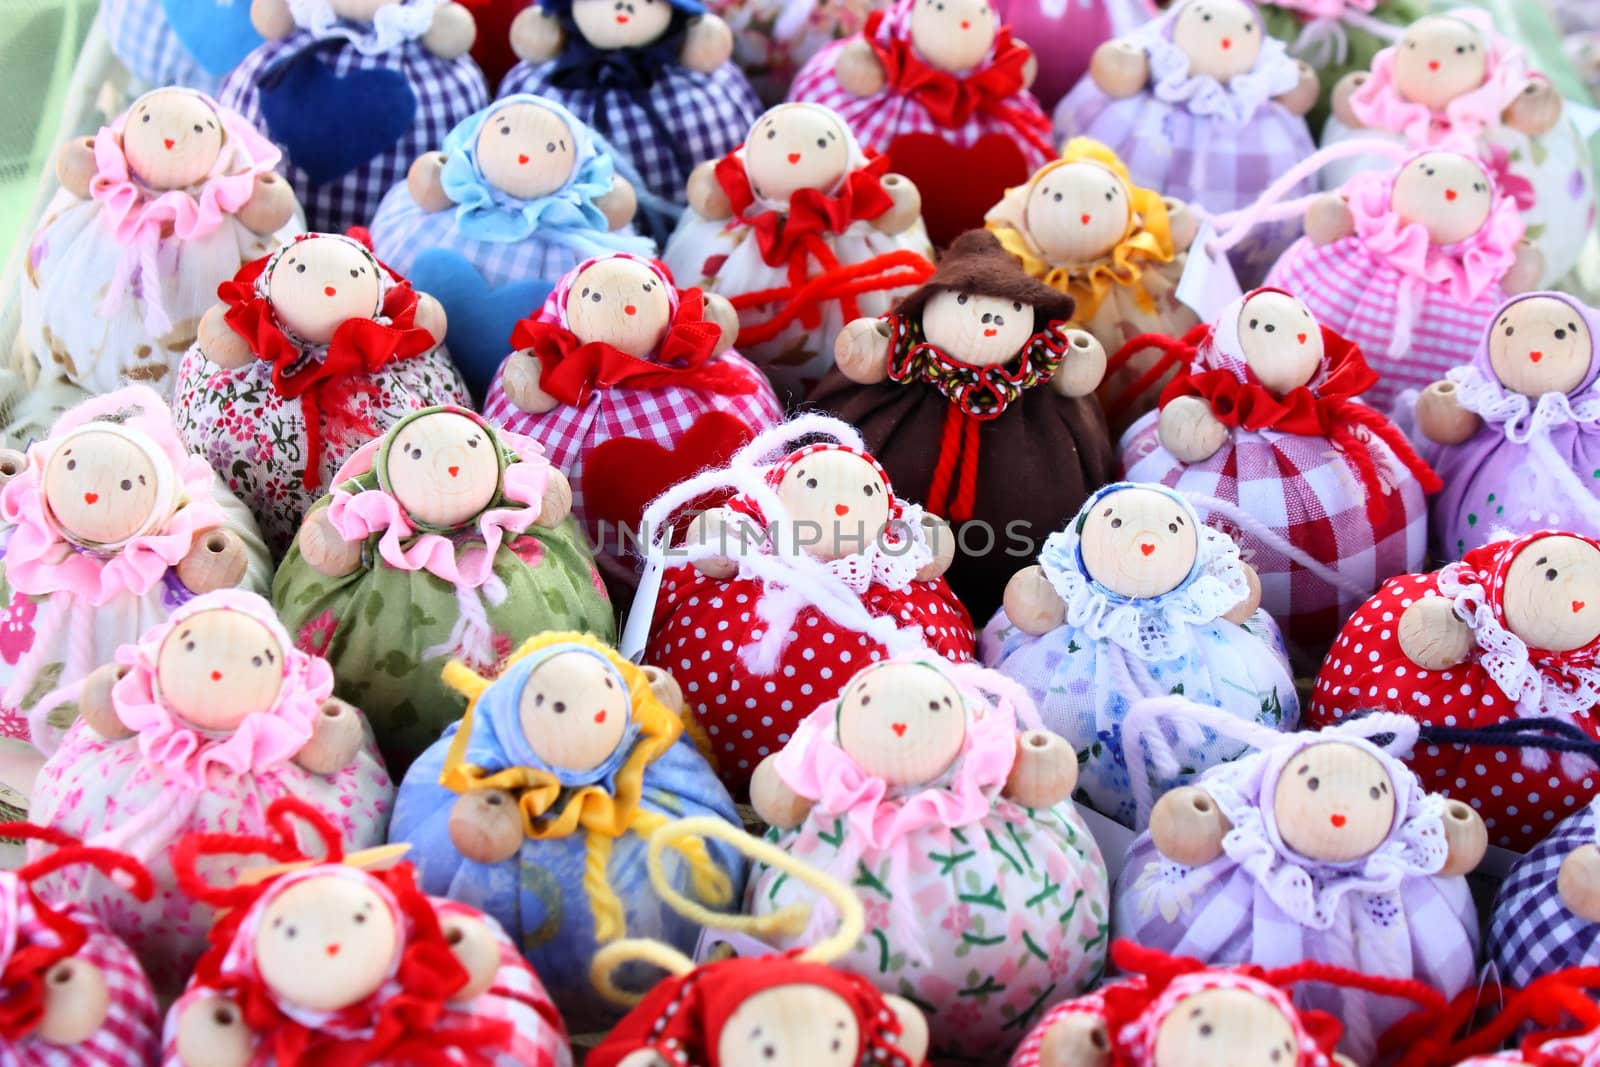 Many little dolls in a retail store